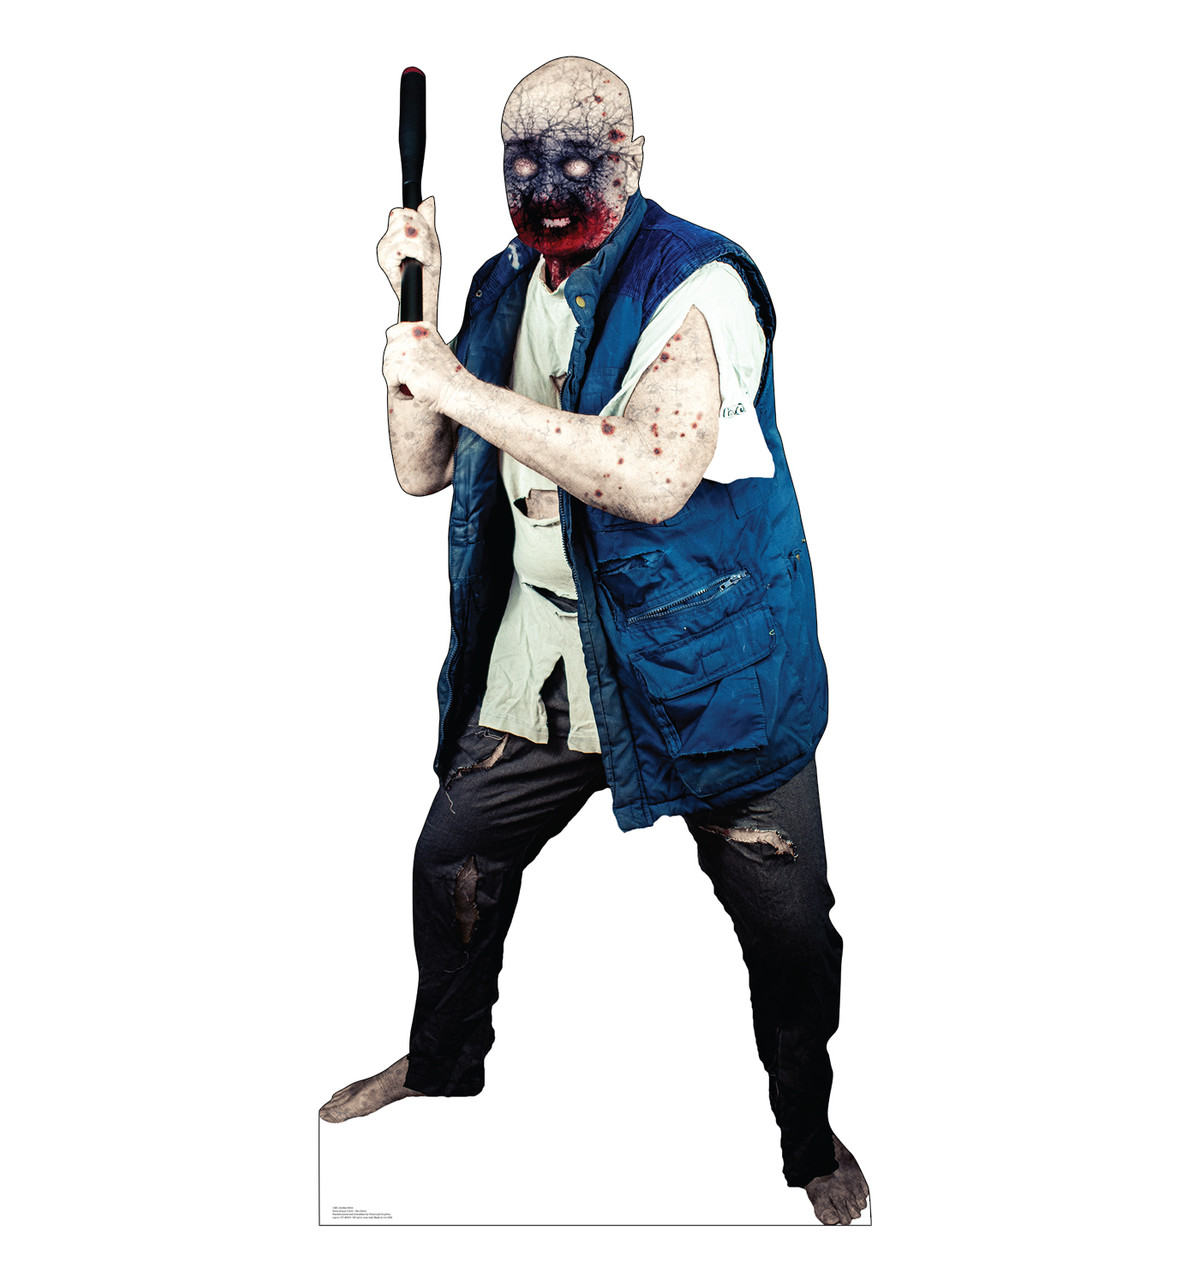 Life-size cardboard standee of a Zombie Killer.